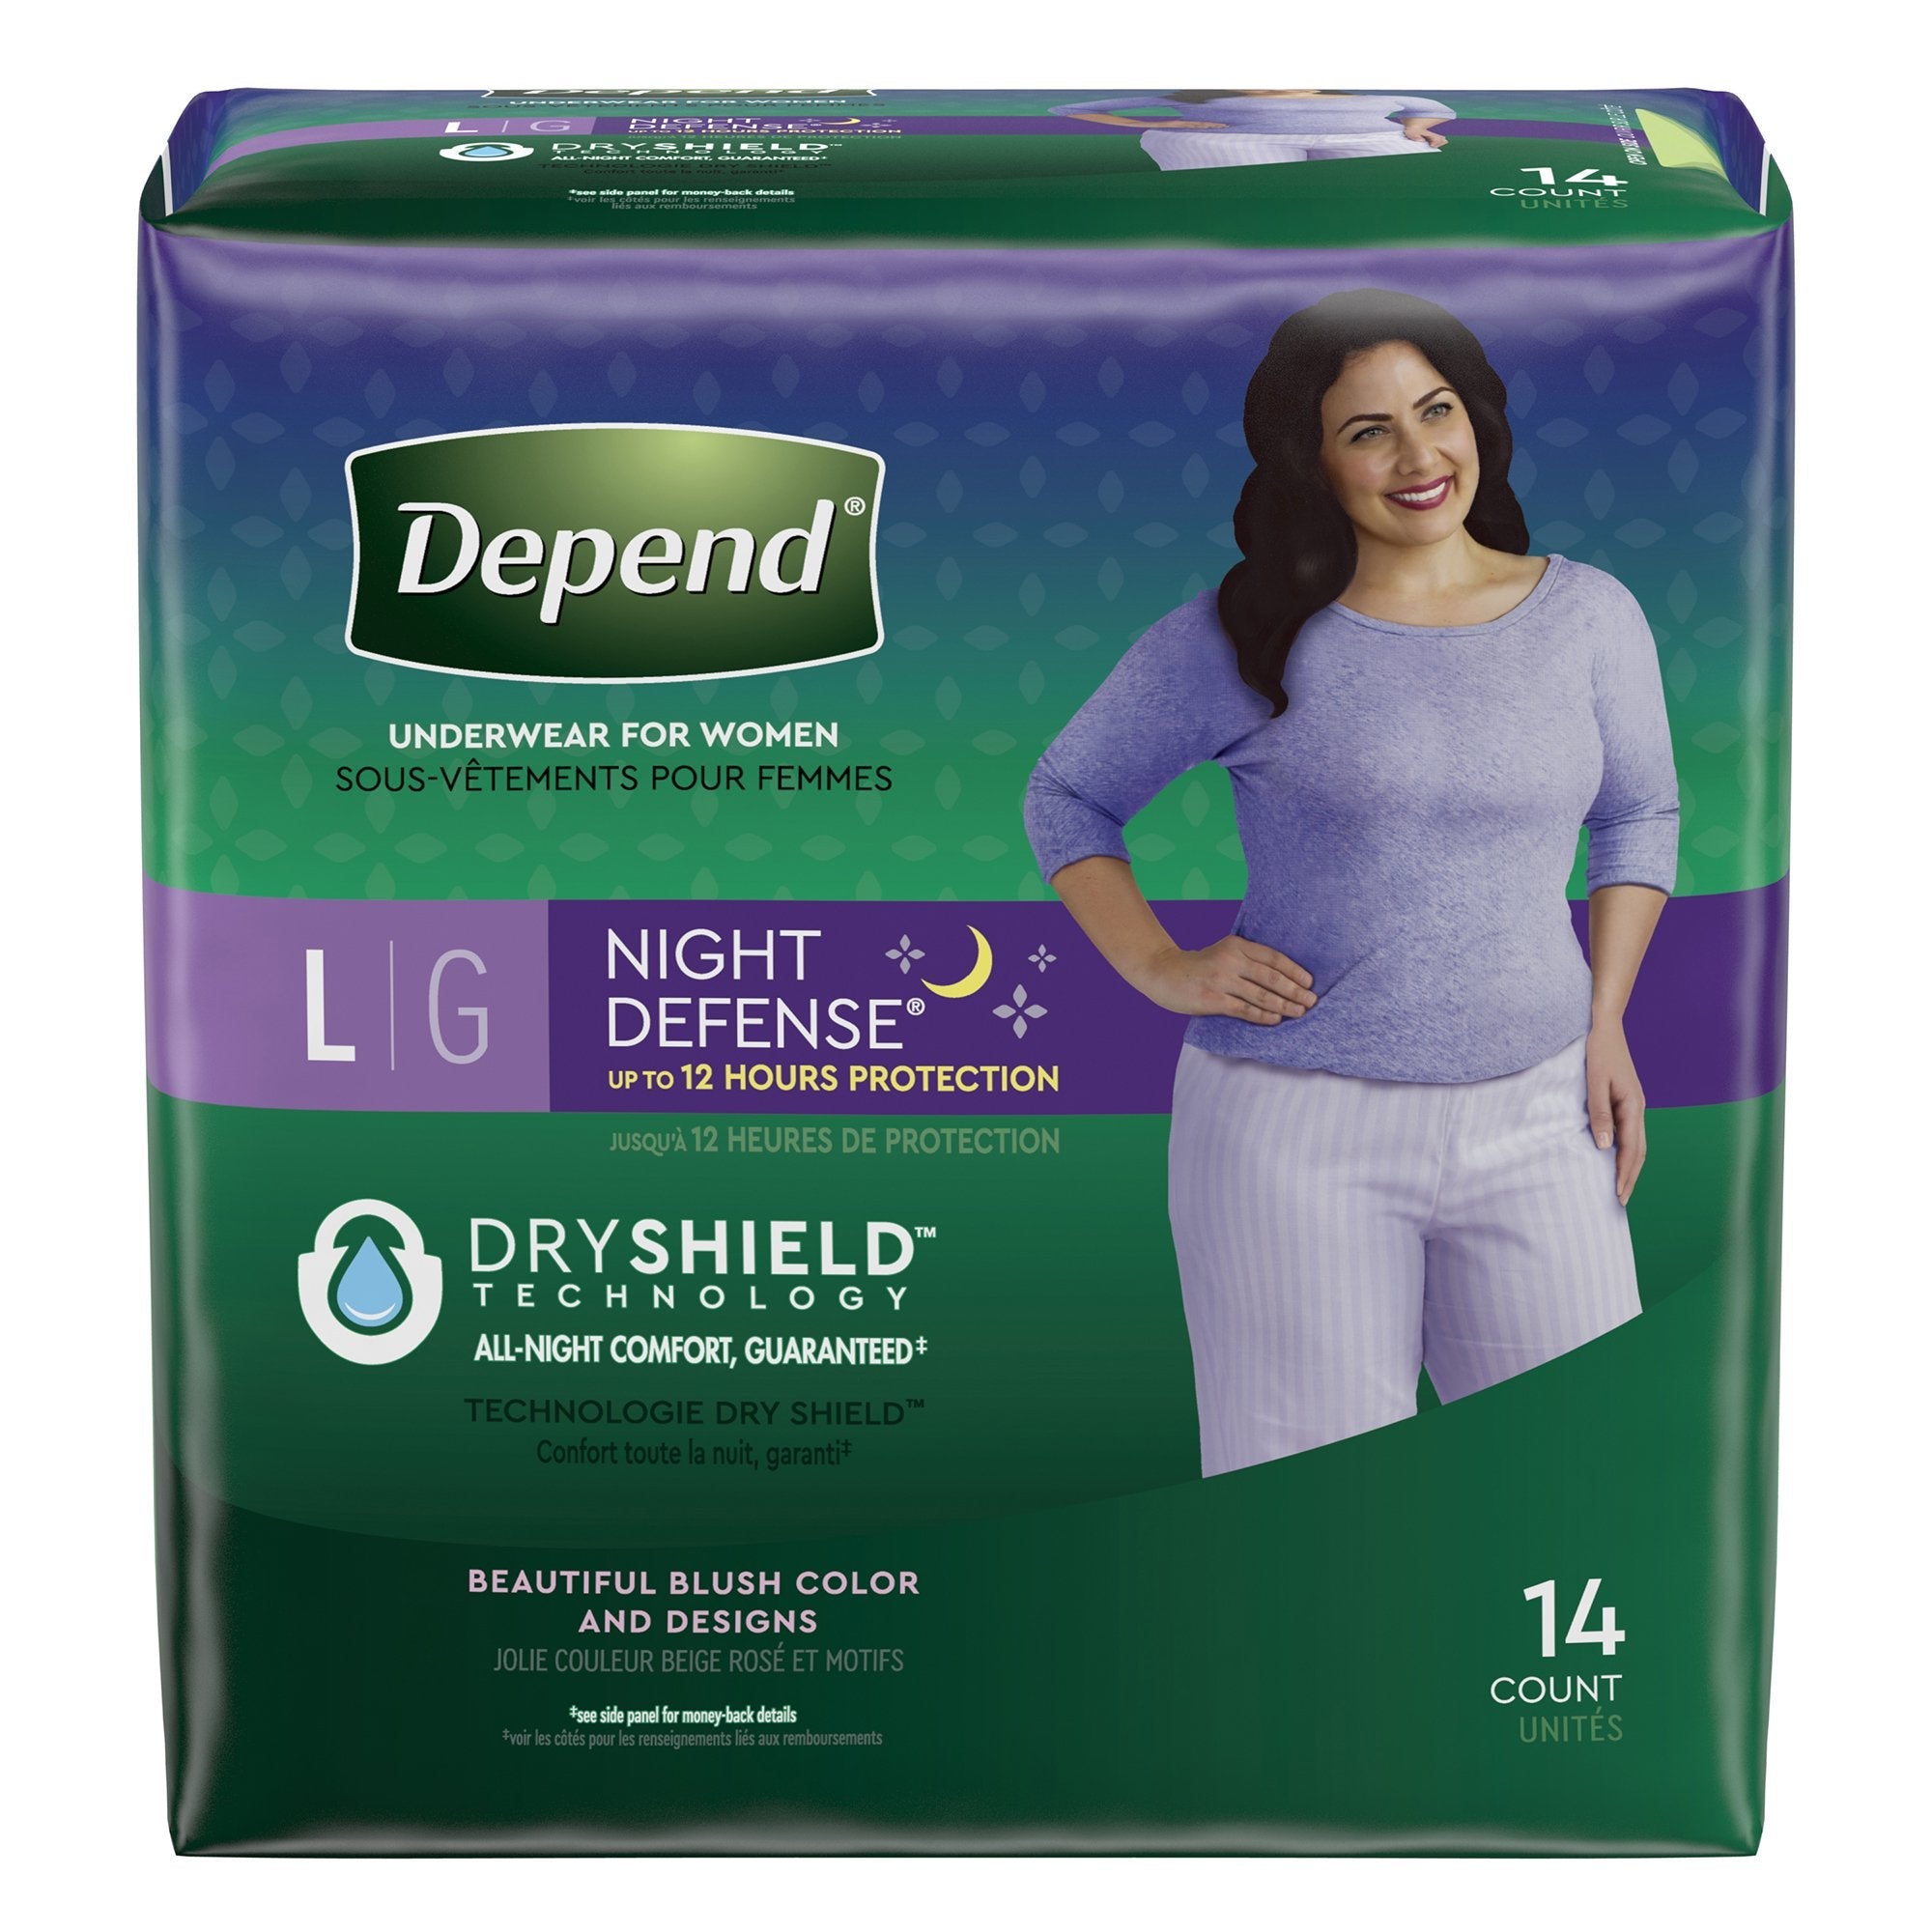 Briefs Vs. Pull Up Style Diapers: A Brief is NOT a Pull-on Diaper -  Tranquility Products